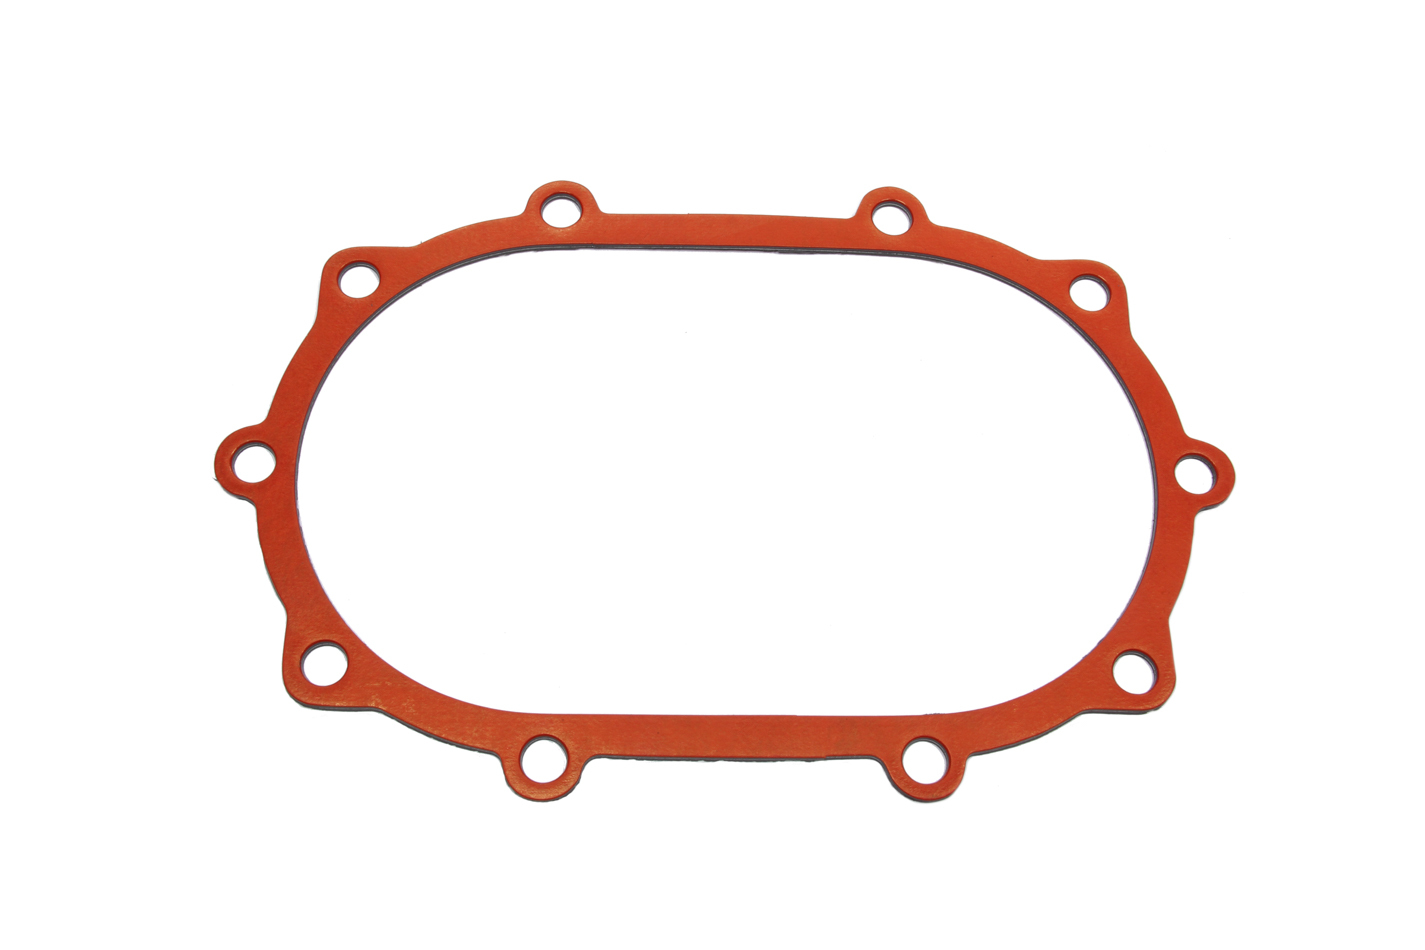 SCE Gaskets 204 - Differential Cover Gasket, Steel Core PTFE Coated Laminate, Quick Change, Each